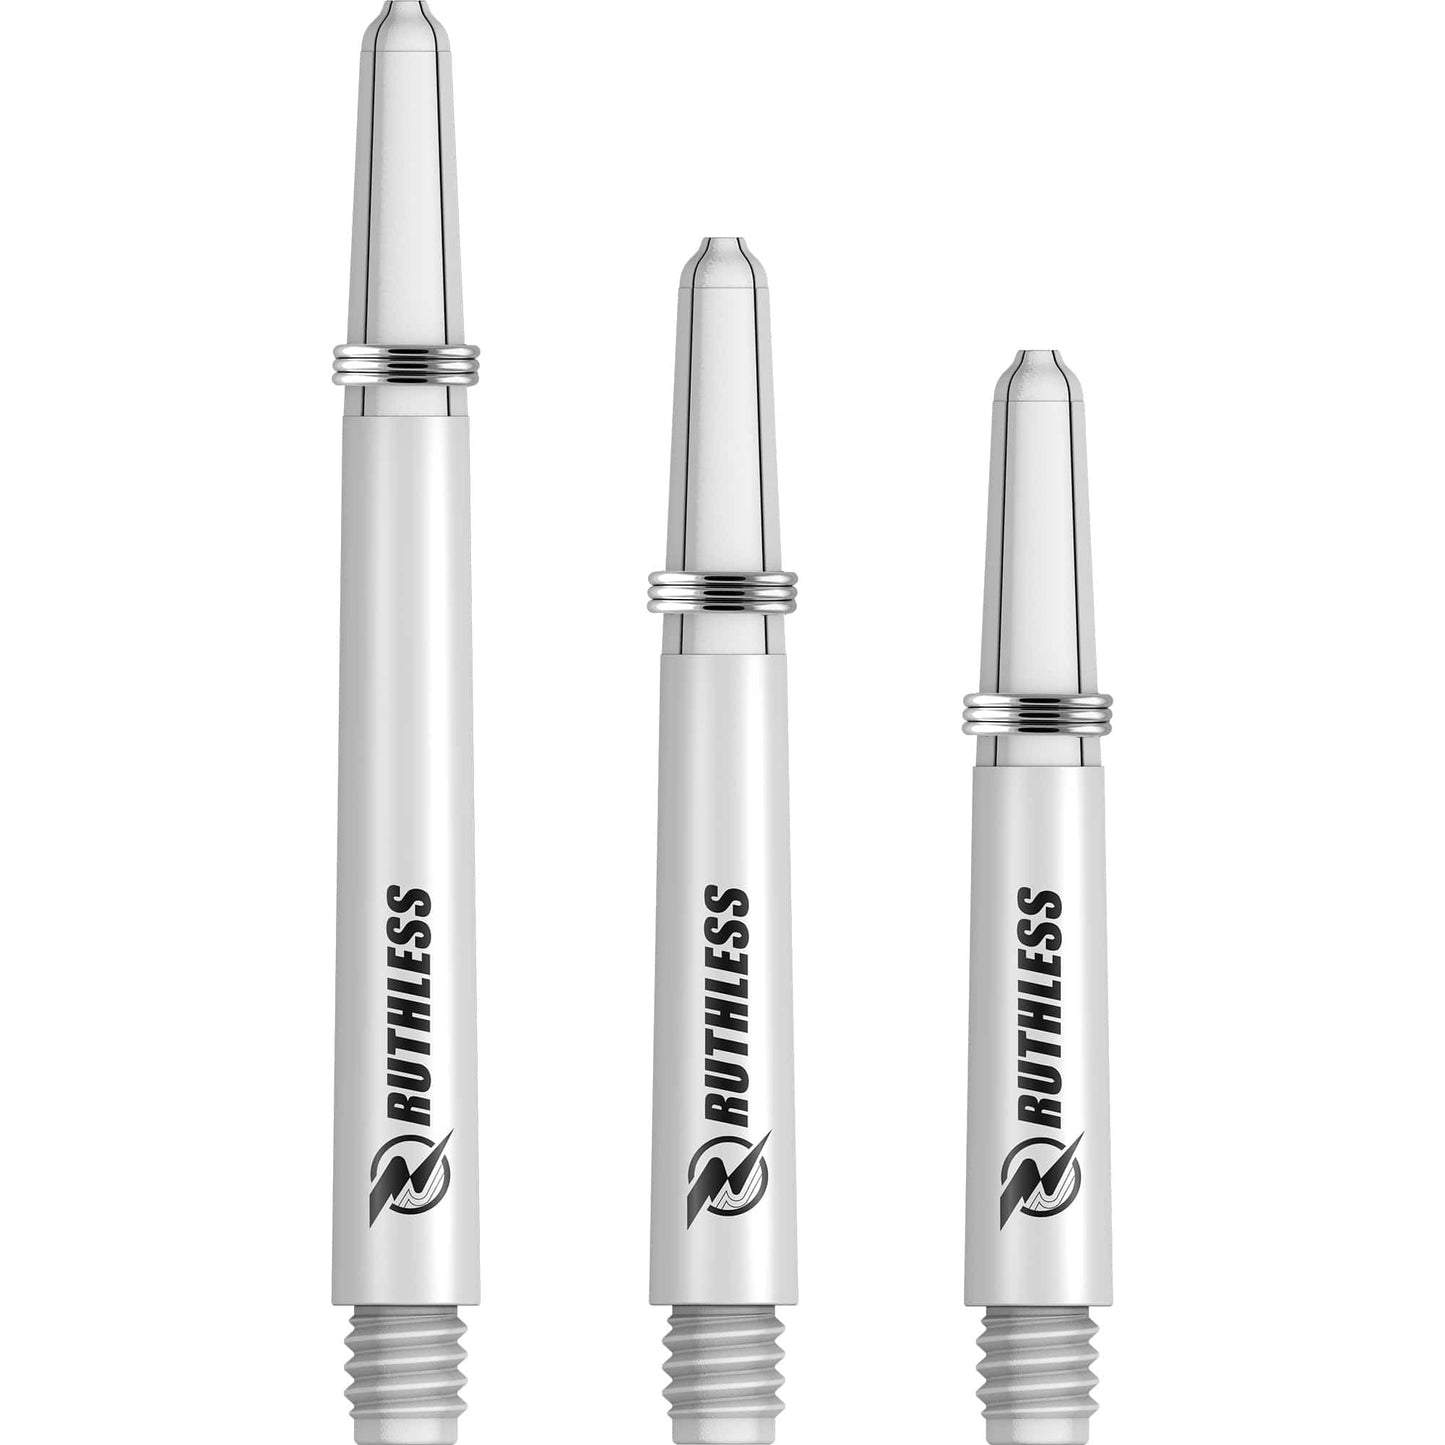 Ruthless Deflectagrip Dart Shafts - Nylon Stems with Springs - White